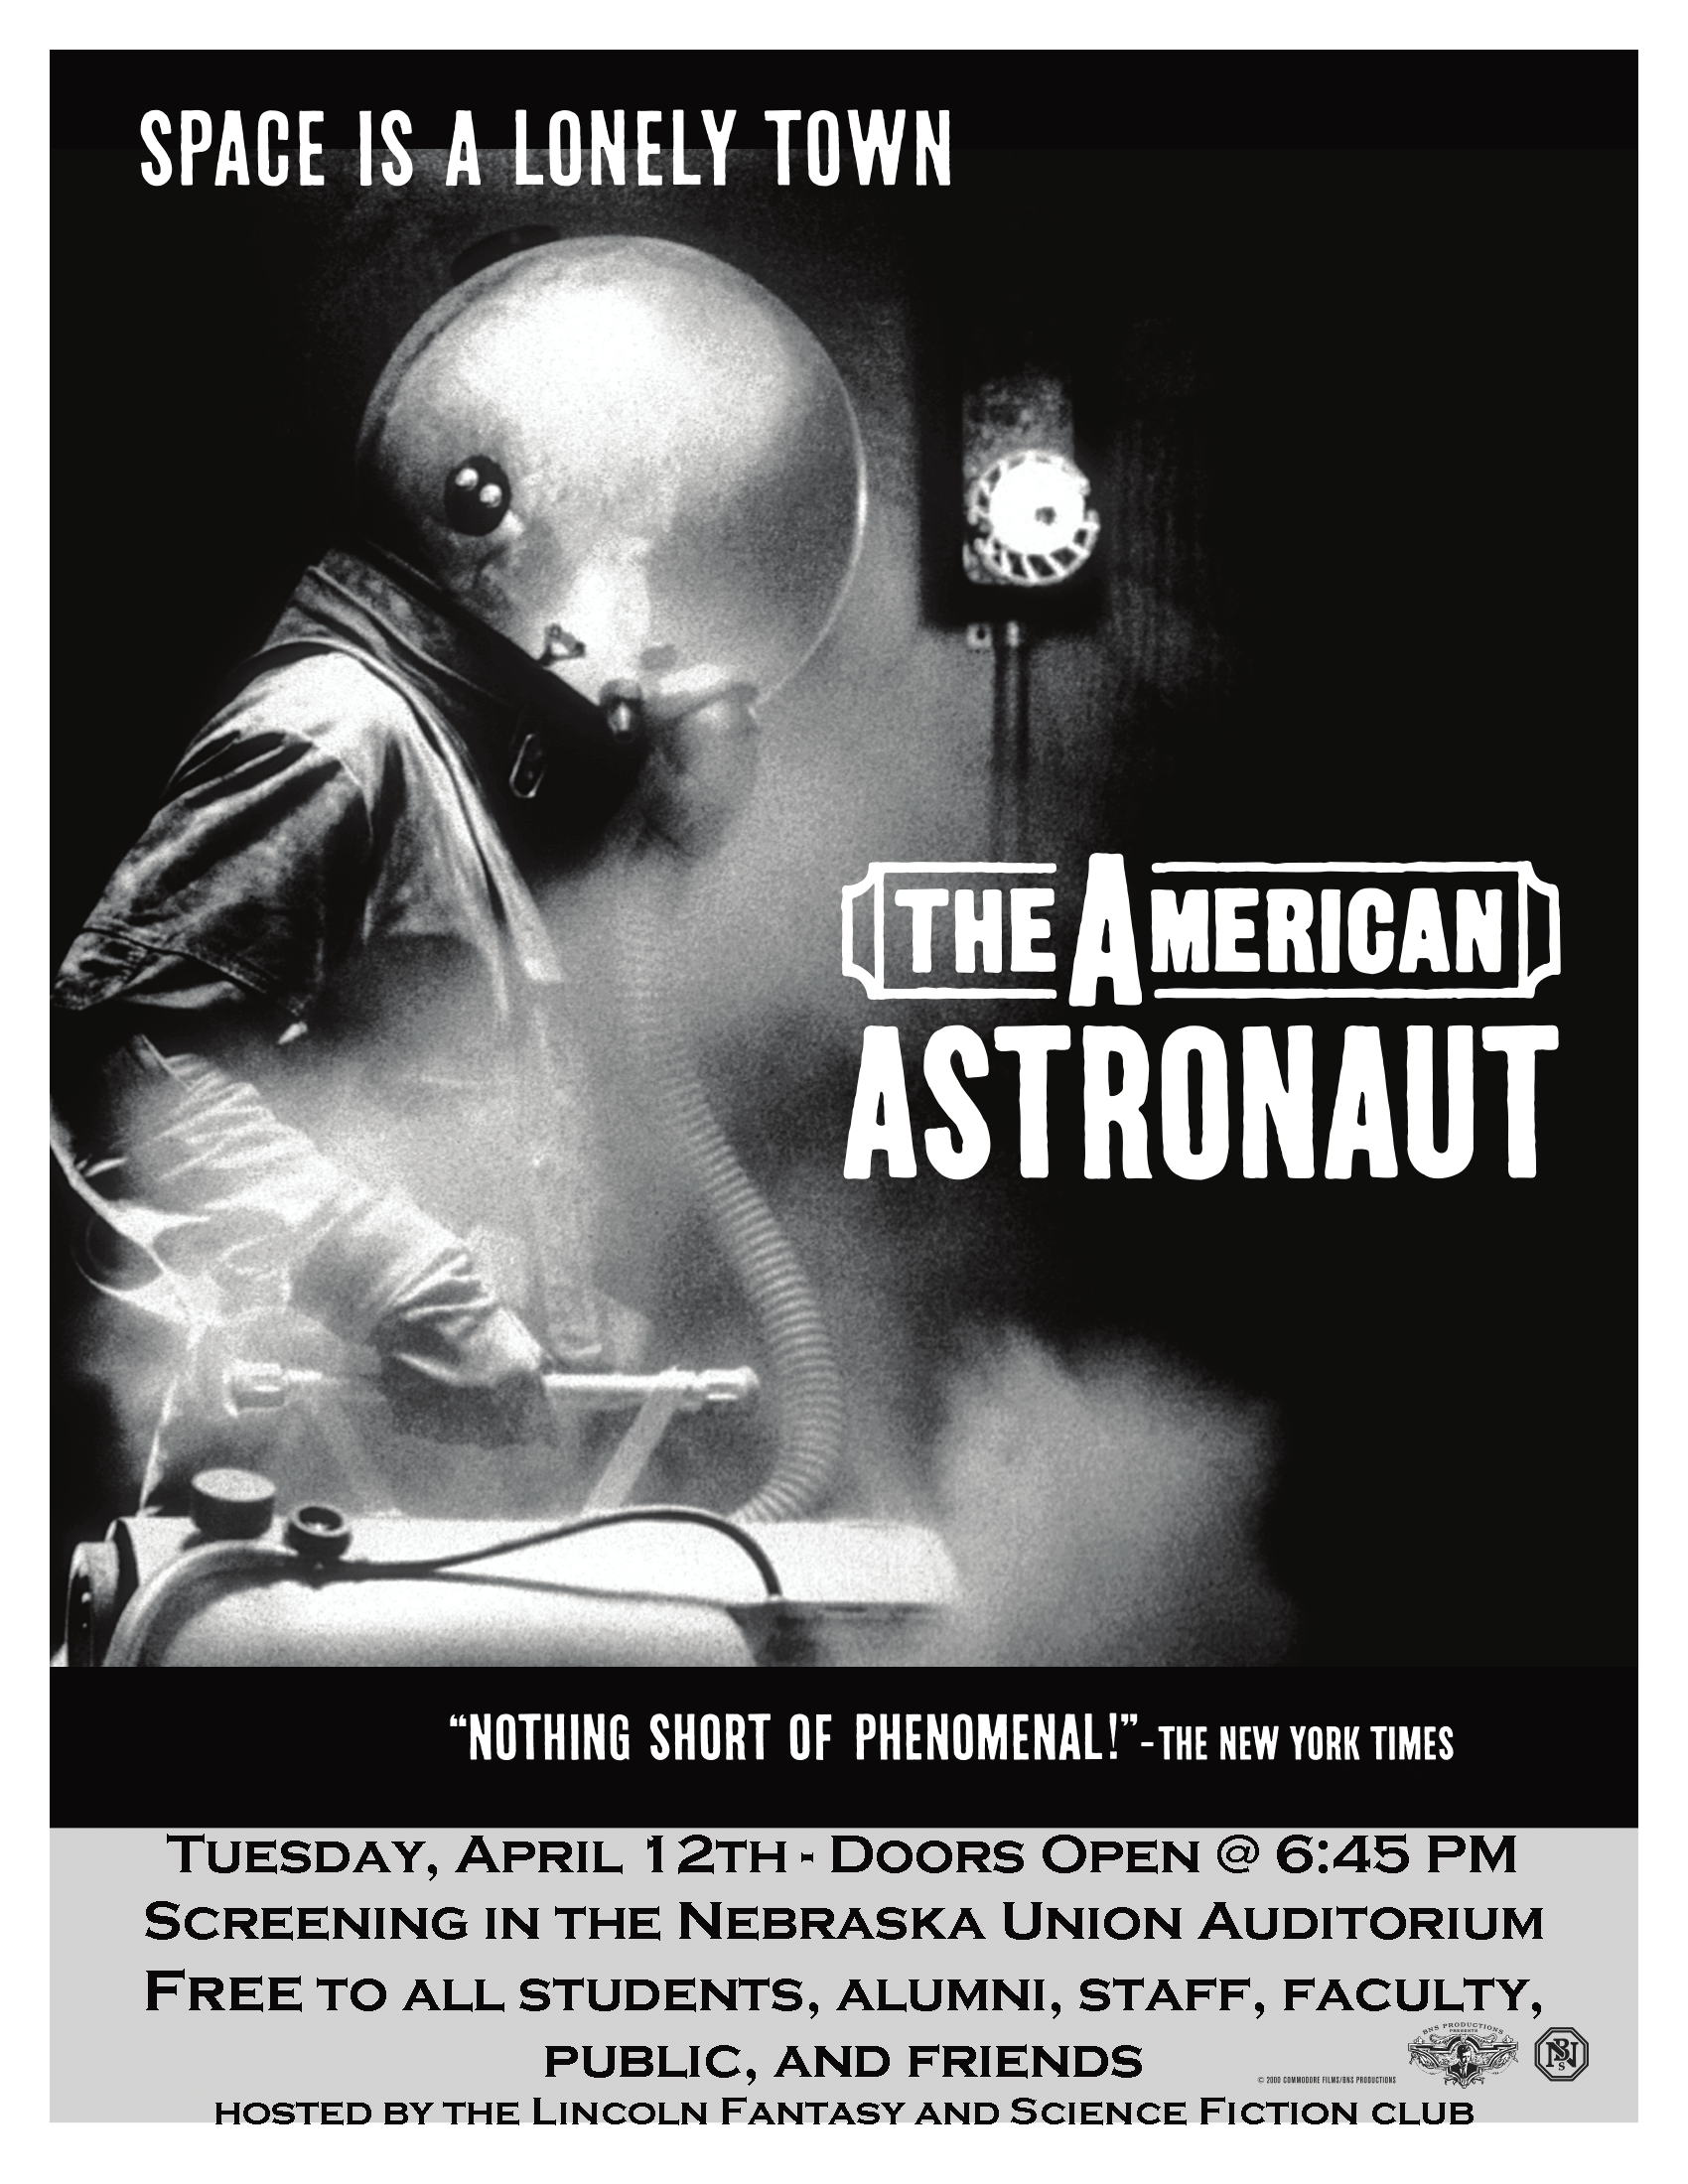 Classic poster of "The American Astronaut"